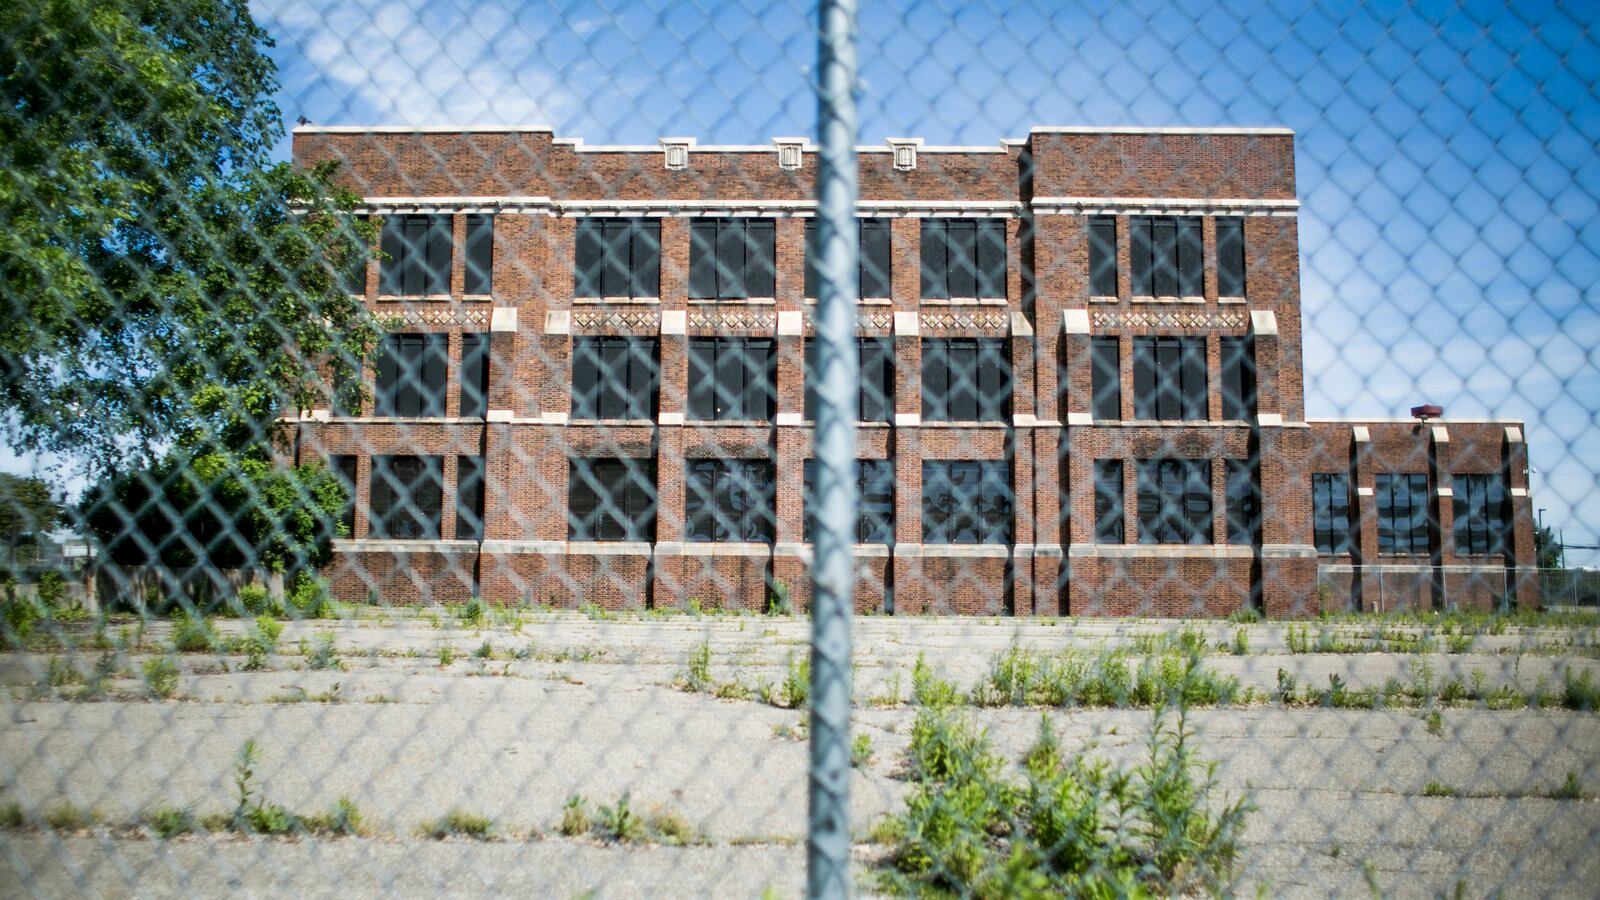 An exterior view of Southeastern High School in Detroit, MI. Photo by Anthony Lanzilote/Chalkbeat; Taken June, 2019